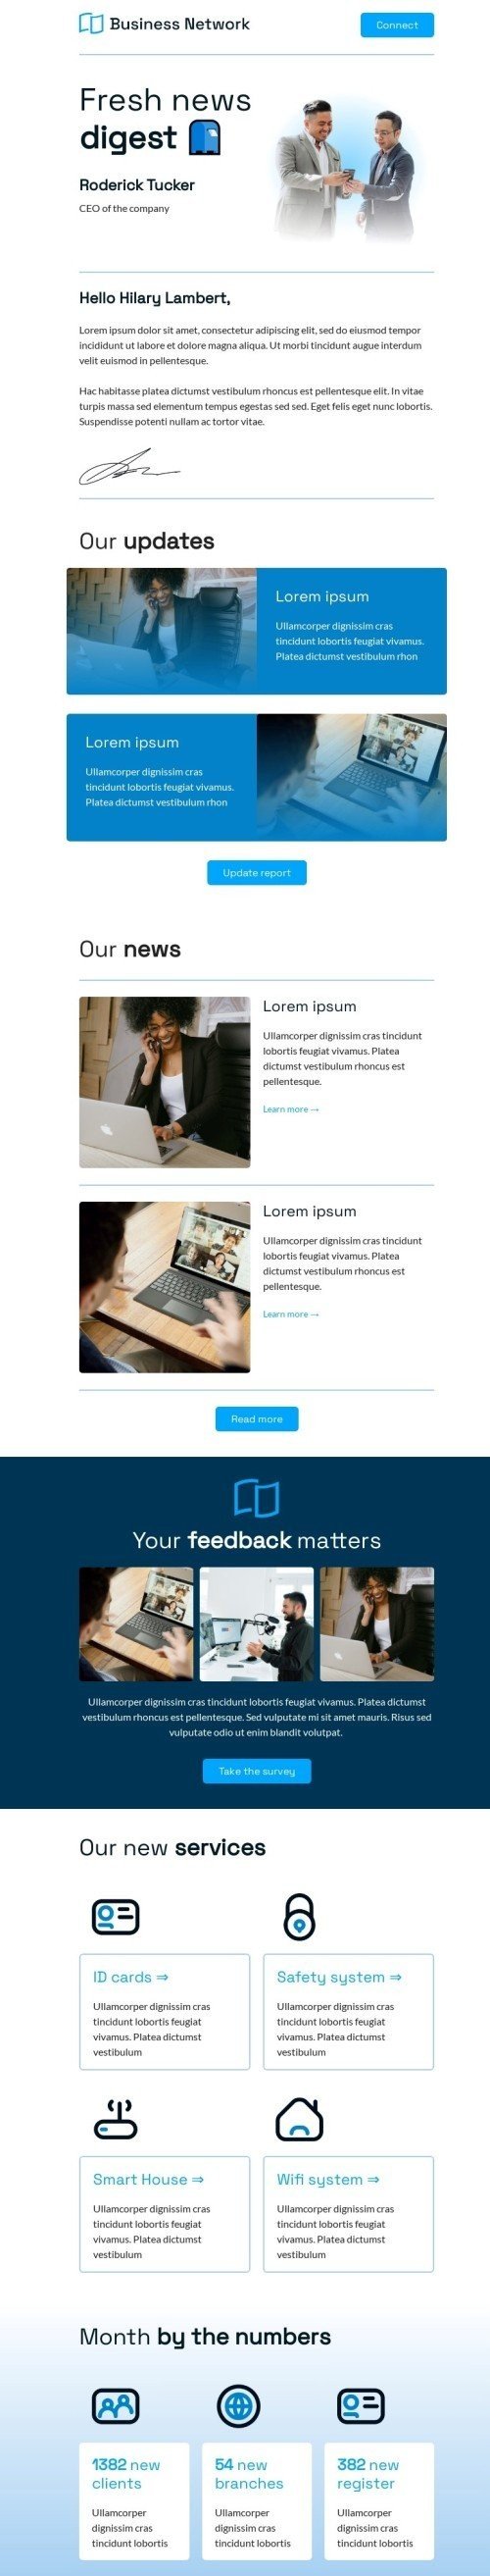 Promo email template «Fresh news digest» for business industry desktop view